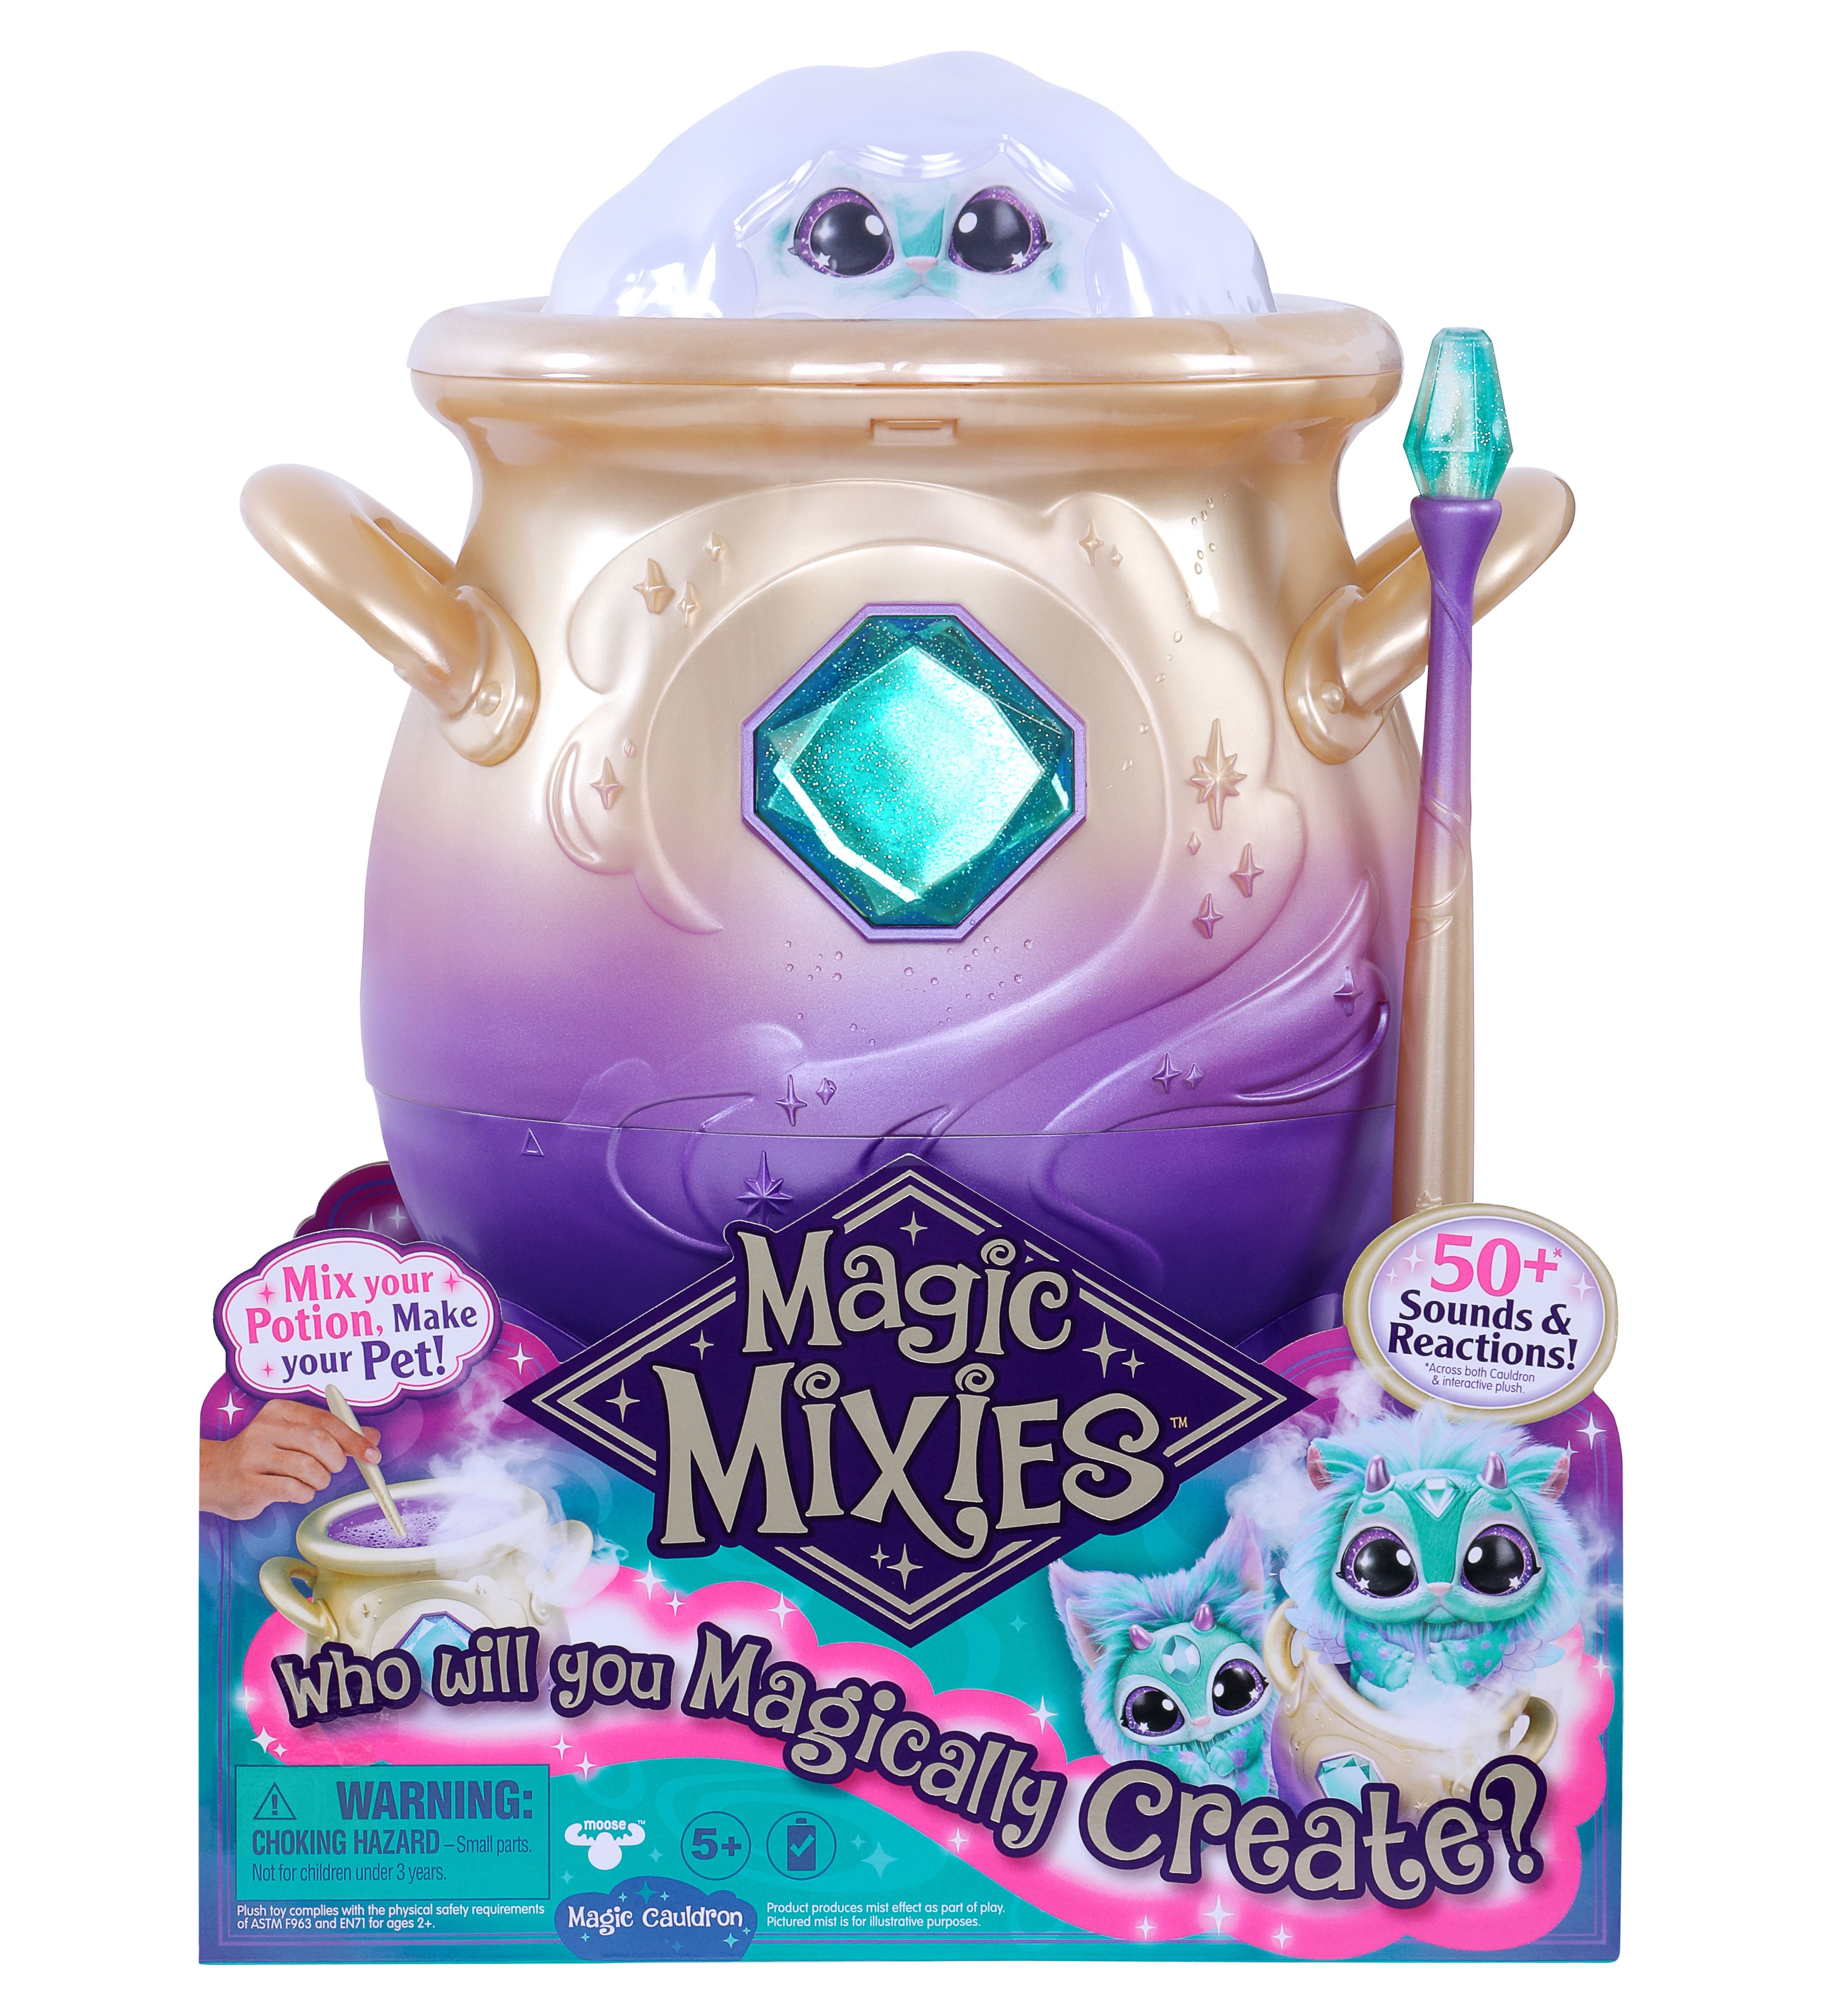 Magic Mixies Magical Misting Cauldron with Interactive 8 inch Blue Plush Toy and 50+ Sounds and Reactions, Toys for Kids, Ages 5+ - image 3 of 15